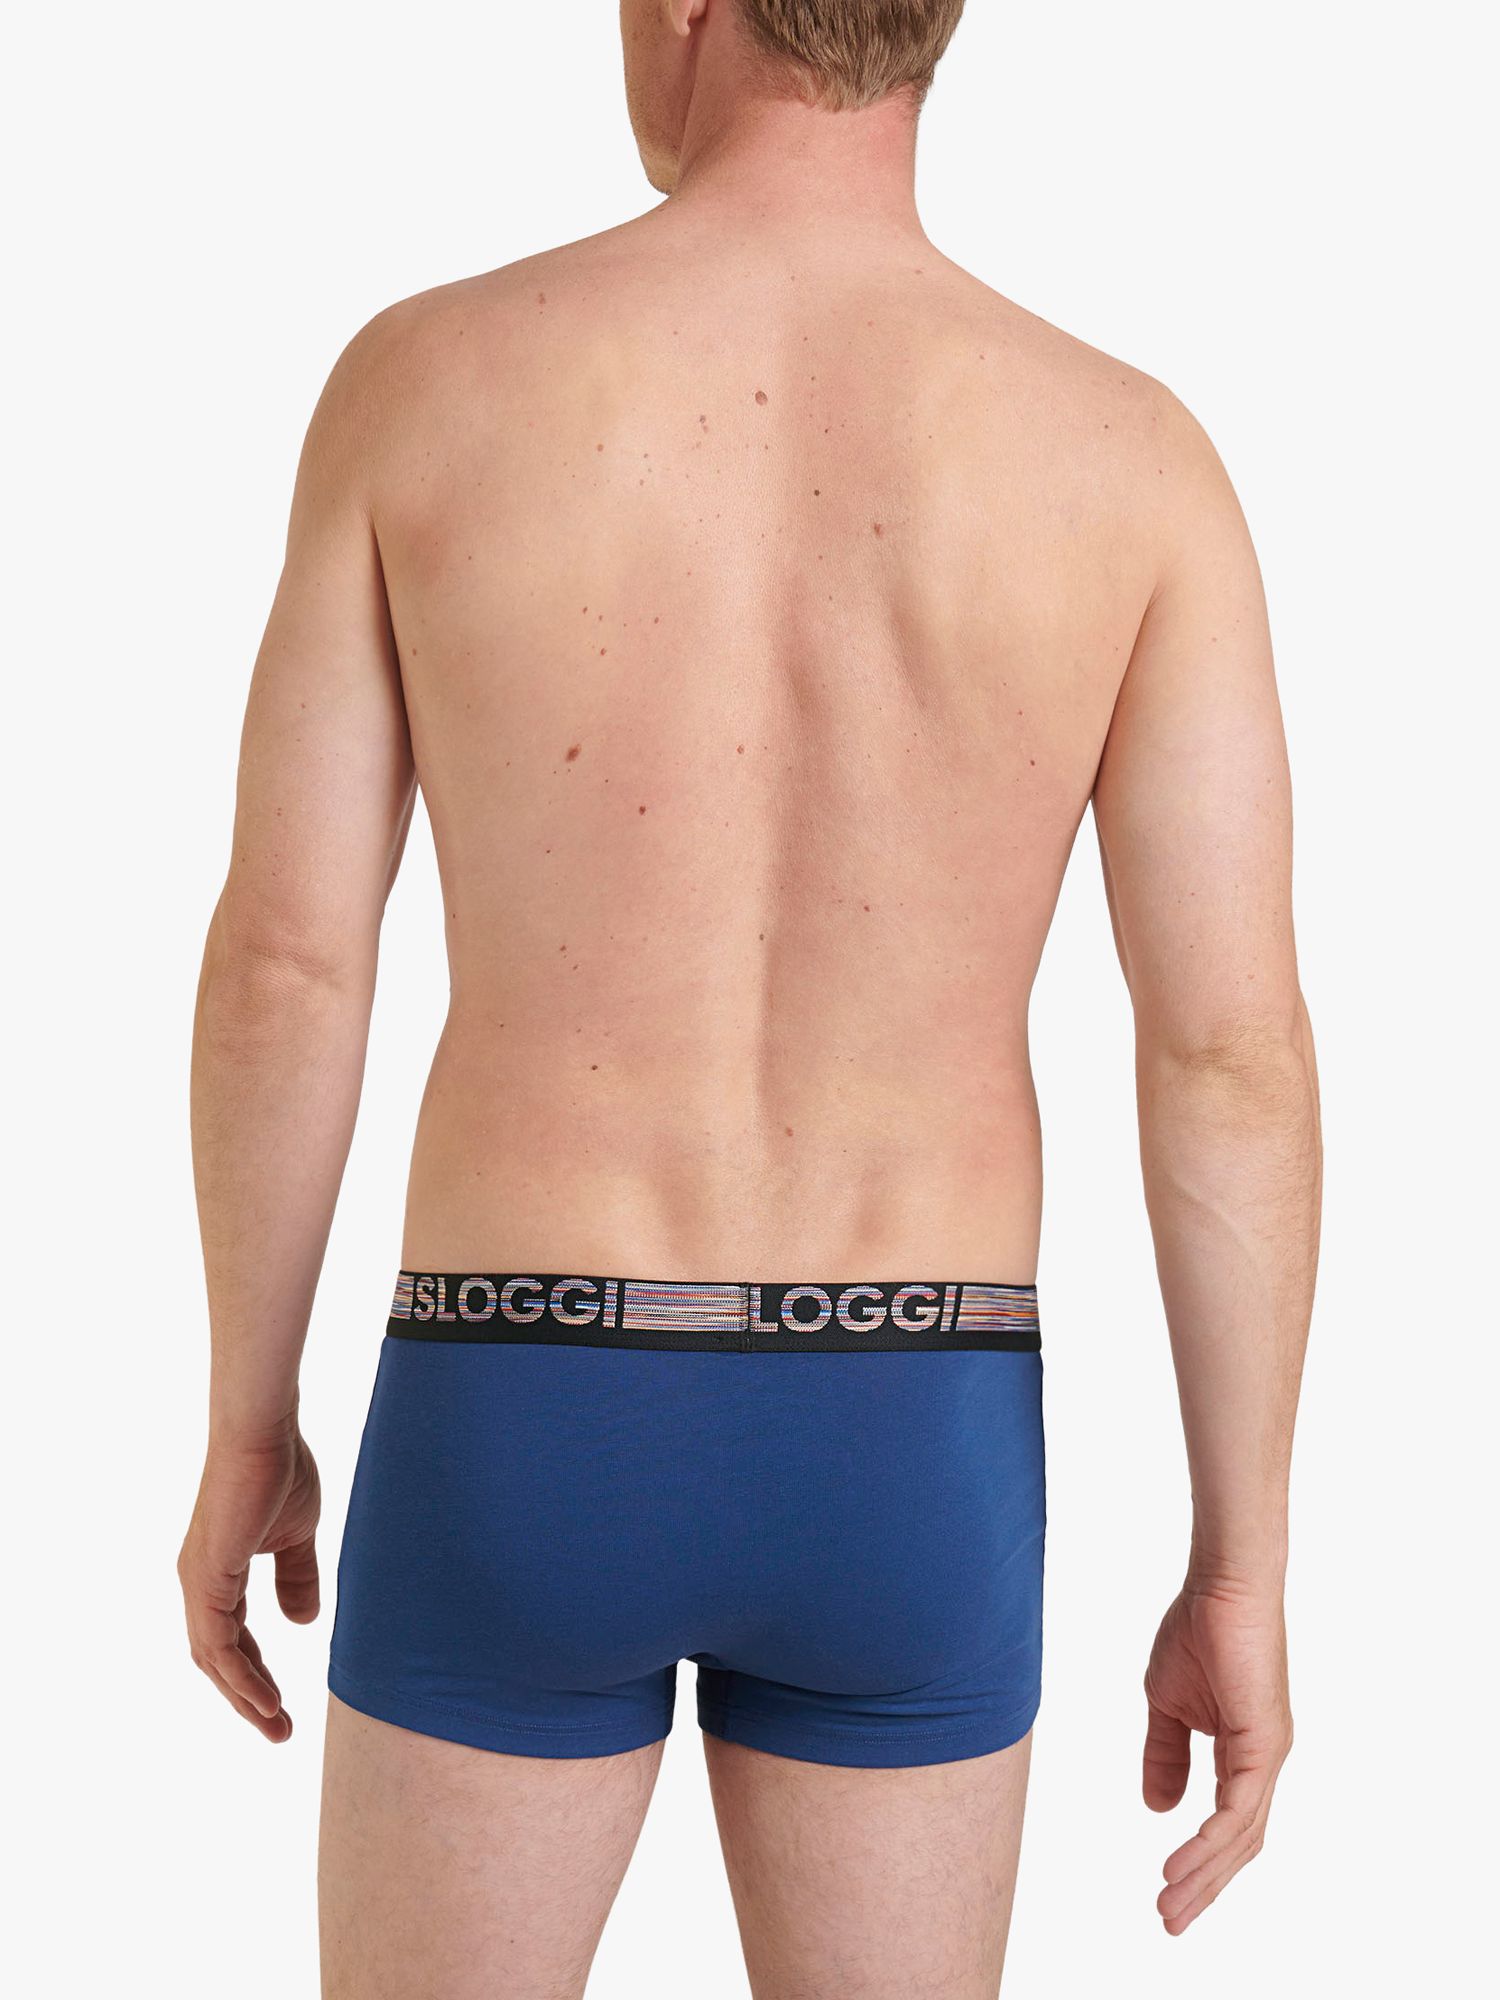 Buy sloggi GO ABC Natural Cotton Stretch Hipster Trunks, Pack of 6 Online at johnlewis.com